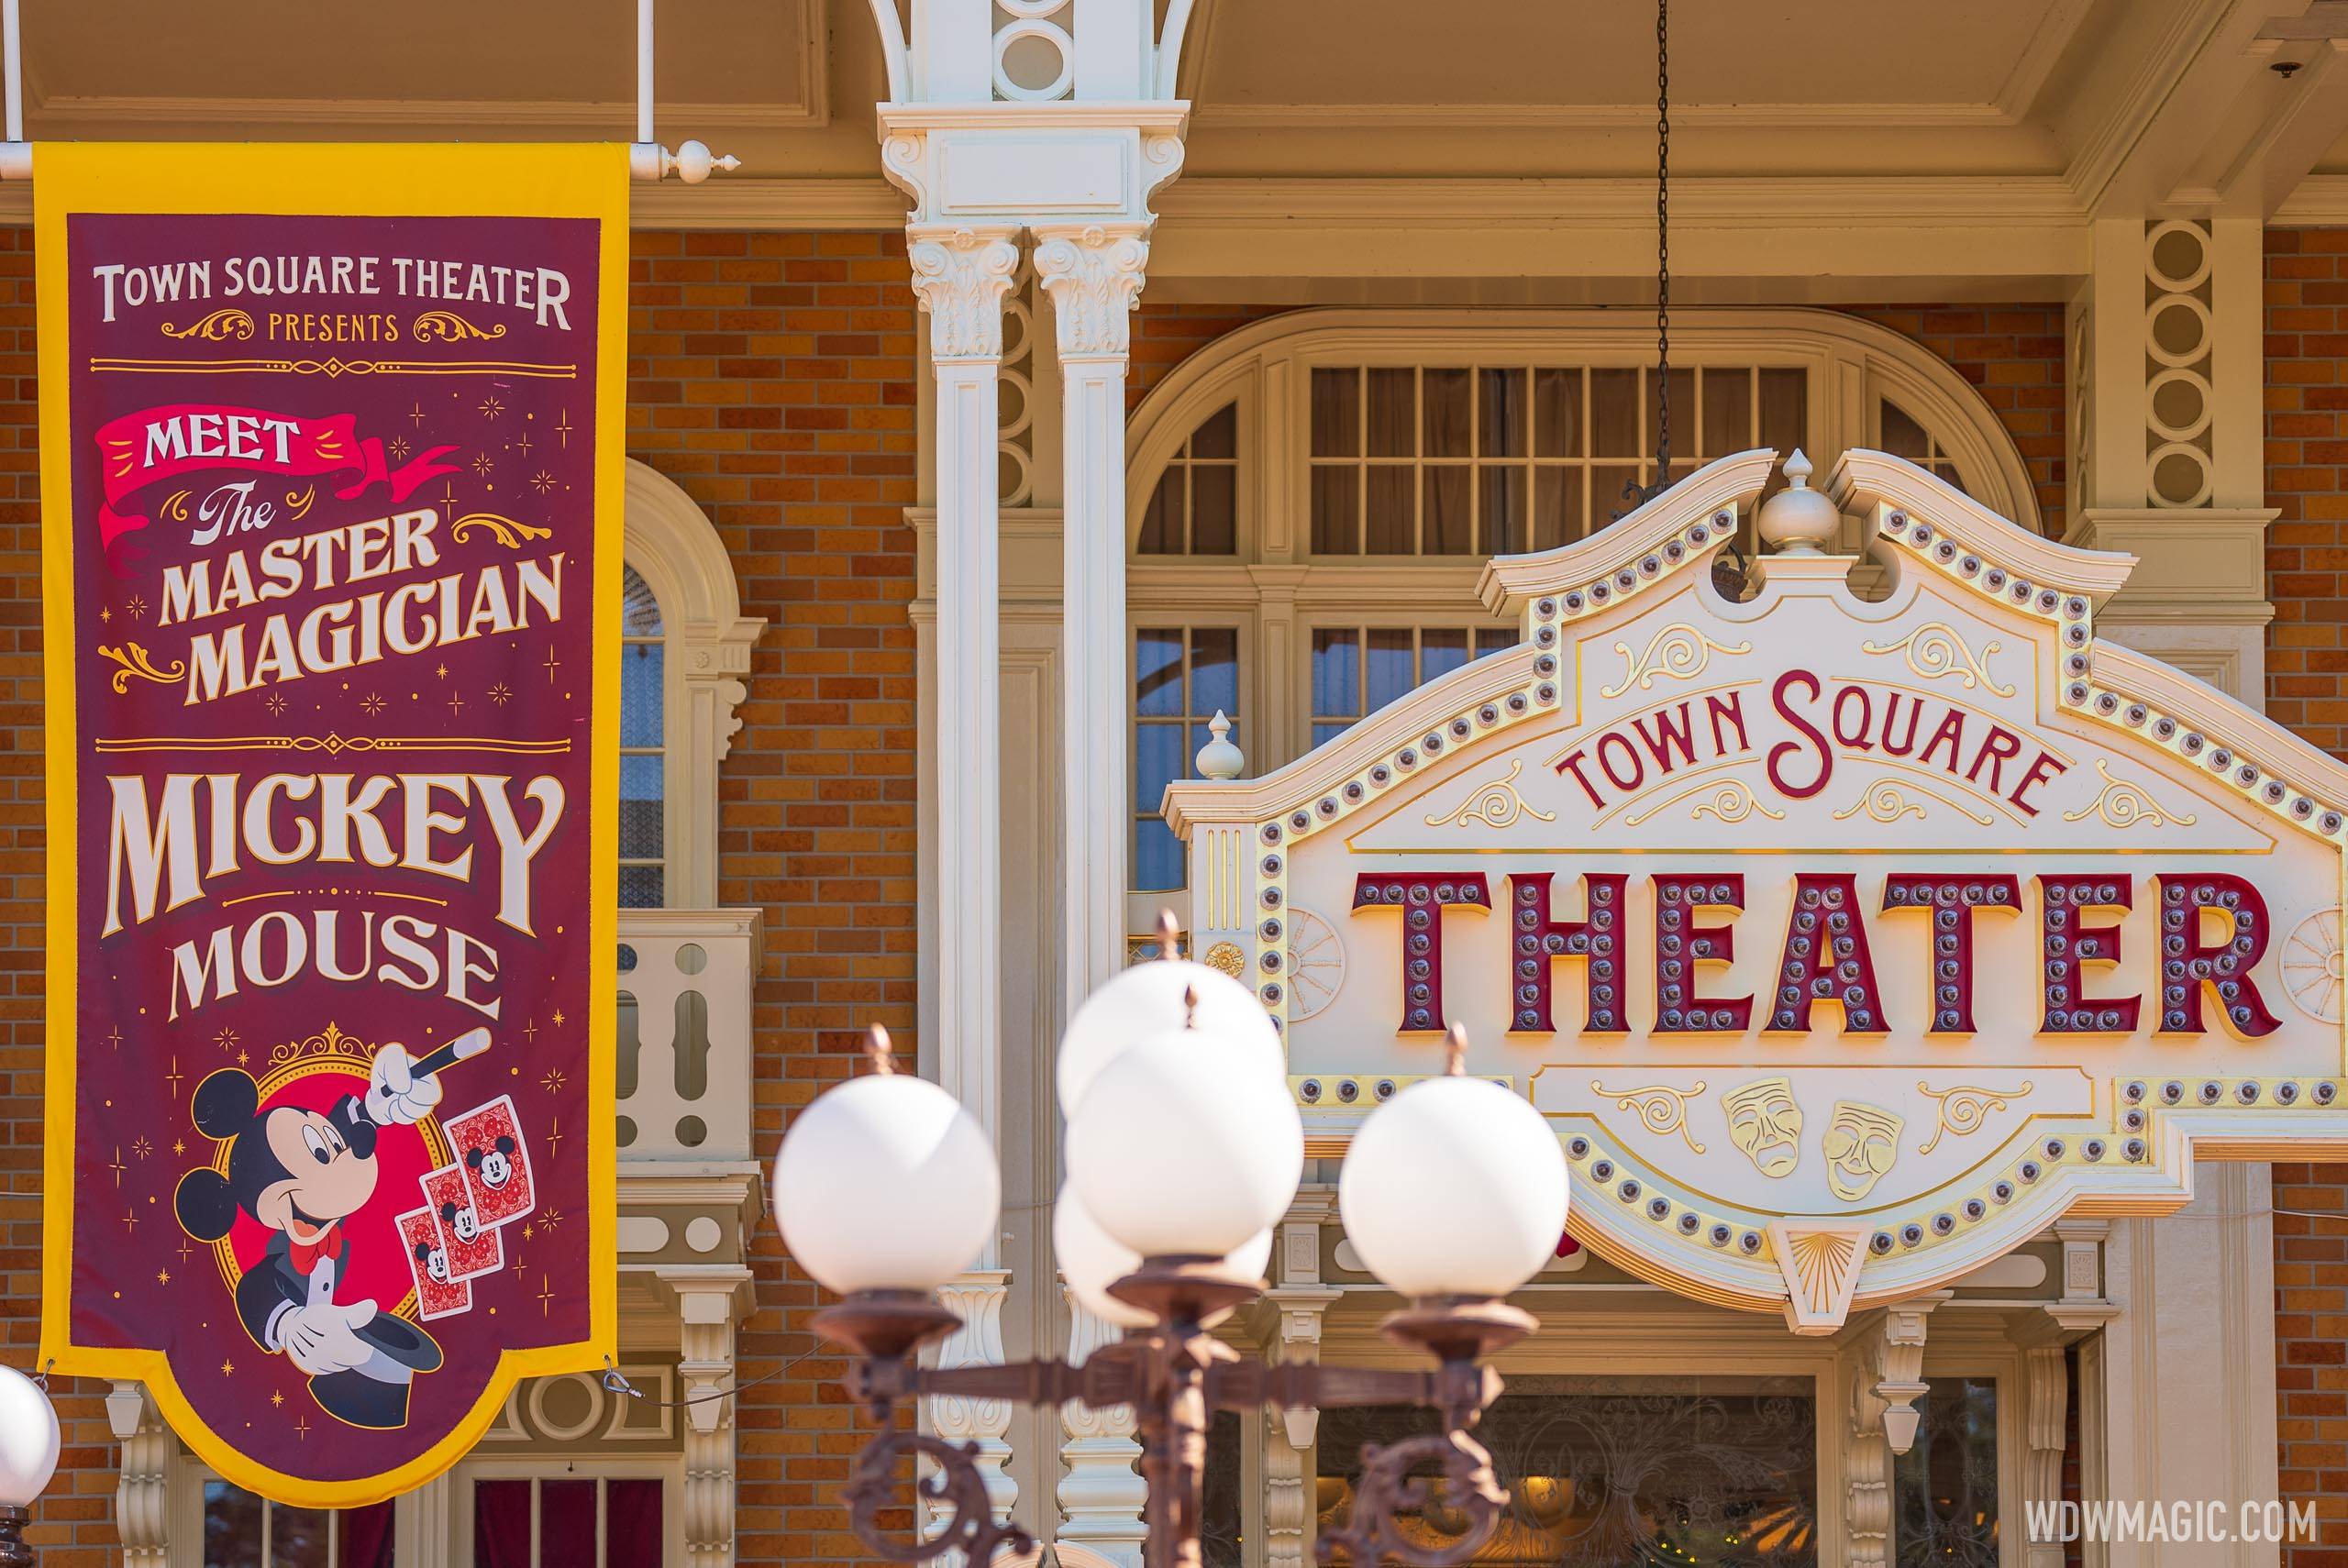 Town Square Theater banners return